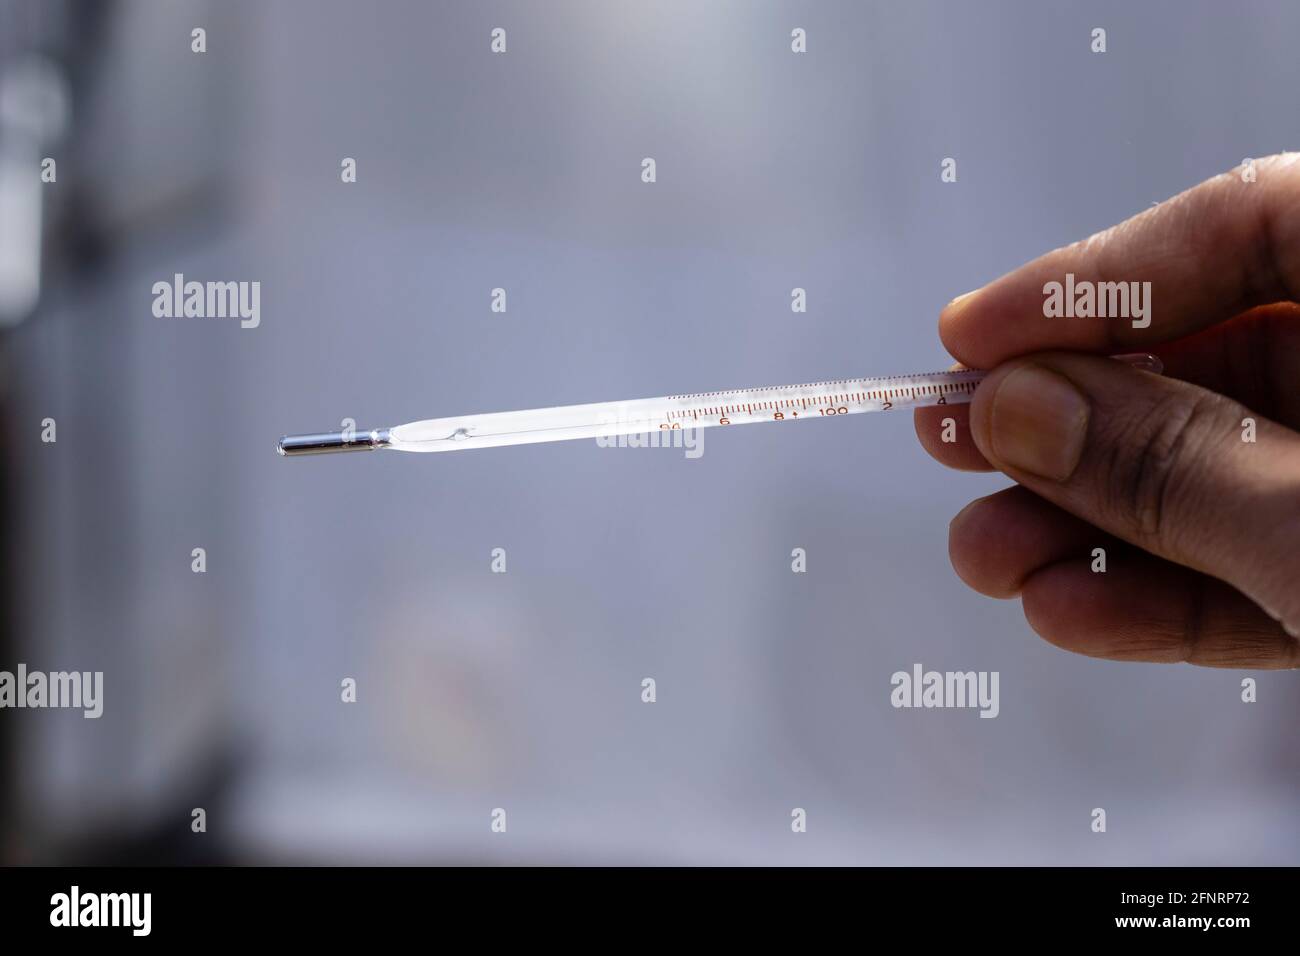 https://c8.alamy.com/comp/2FNRP72/selective-focus-on-an-analog-thermometer-held-in-human-hand-2FNRP72.jpg